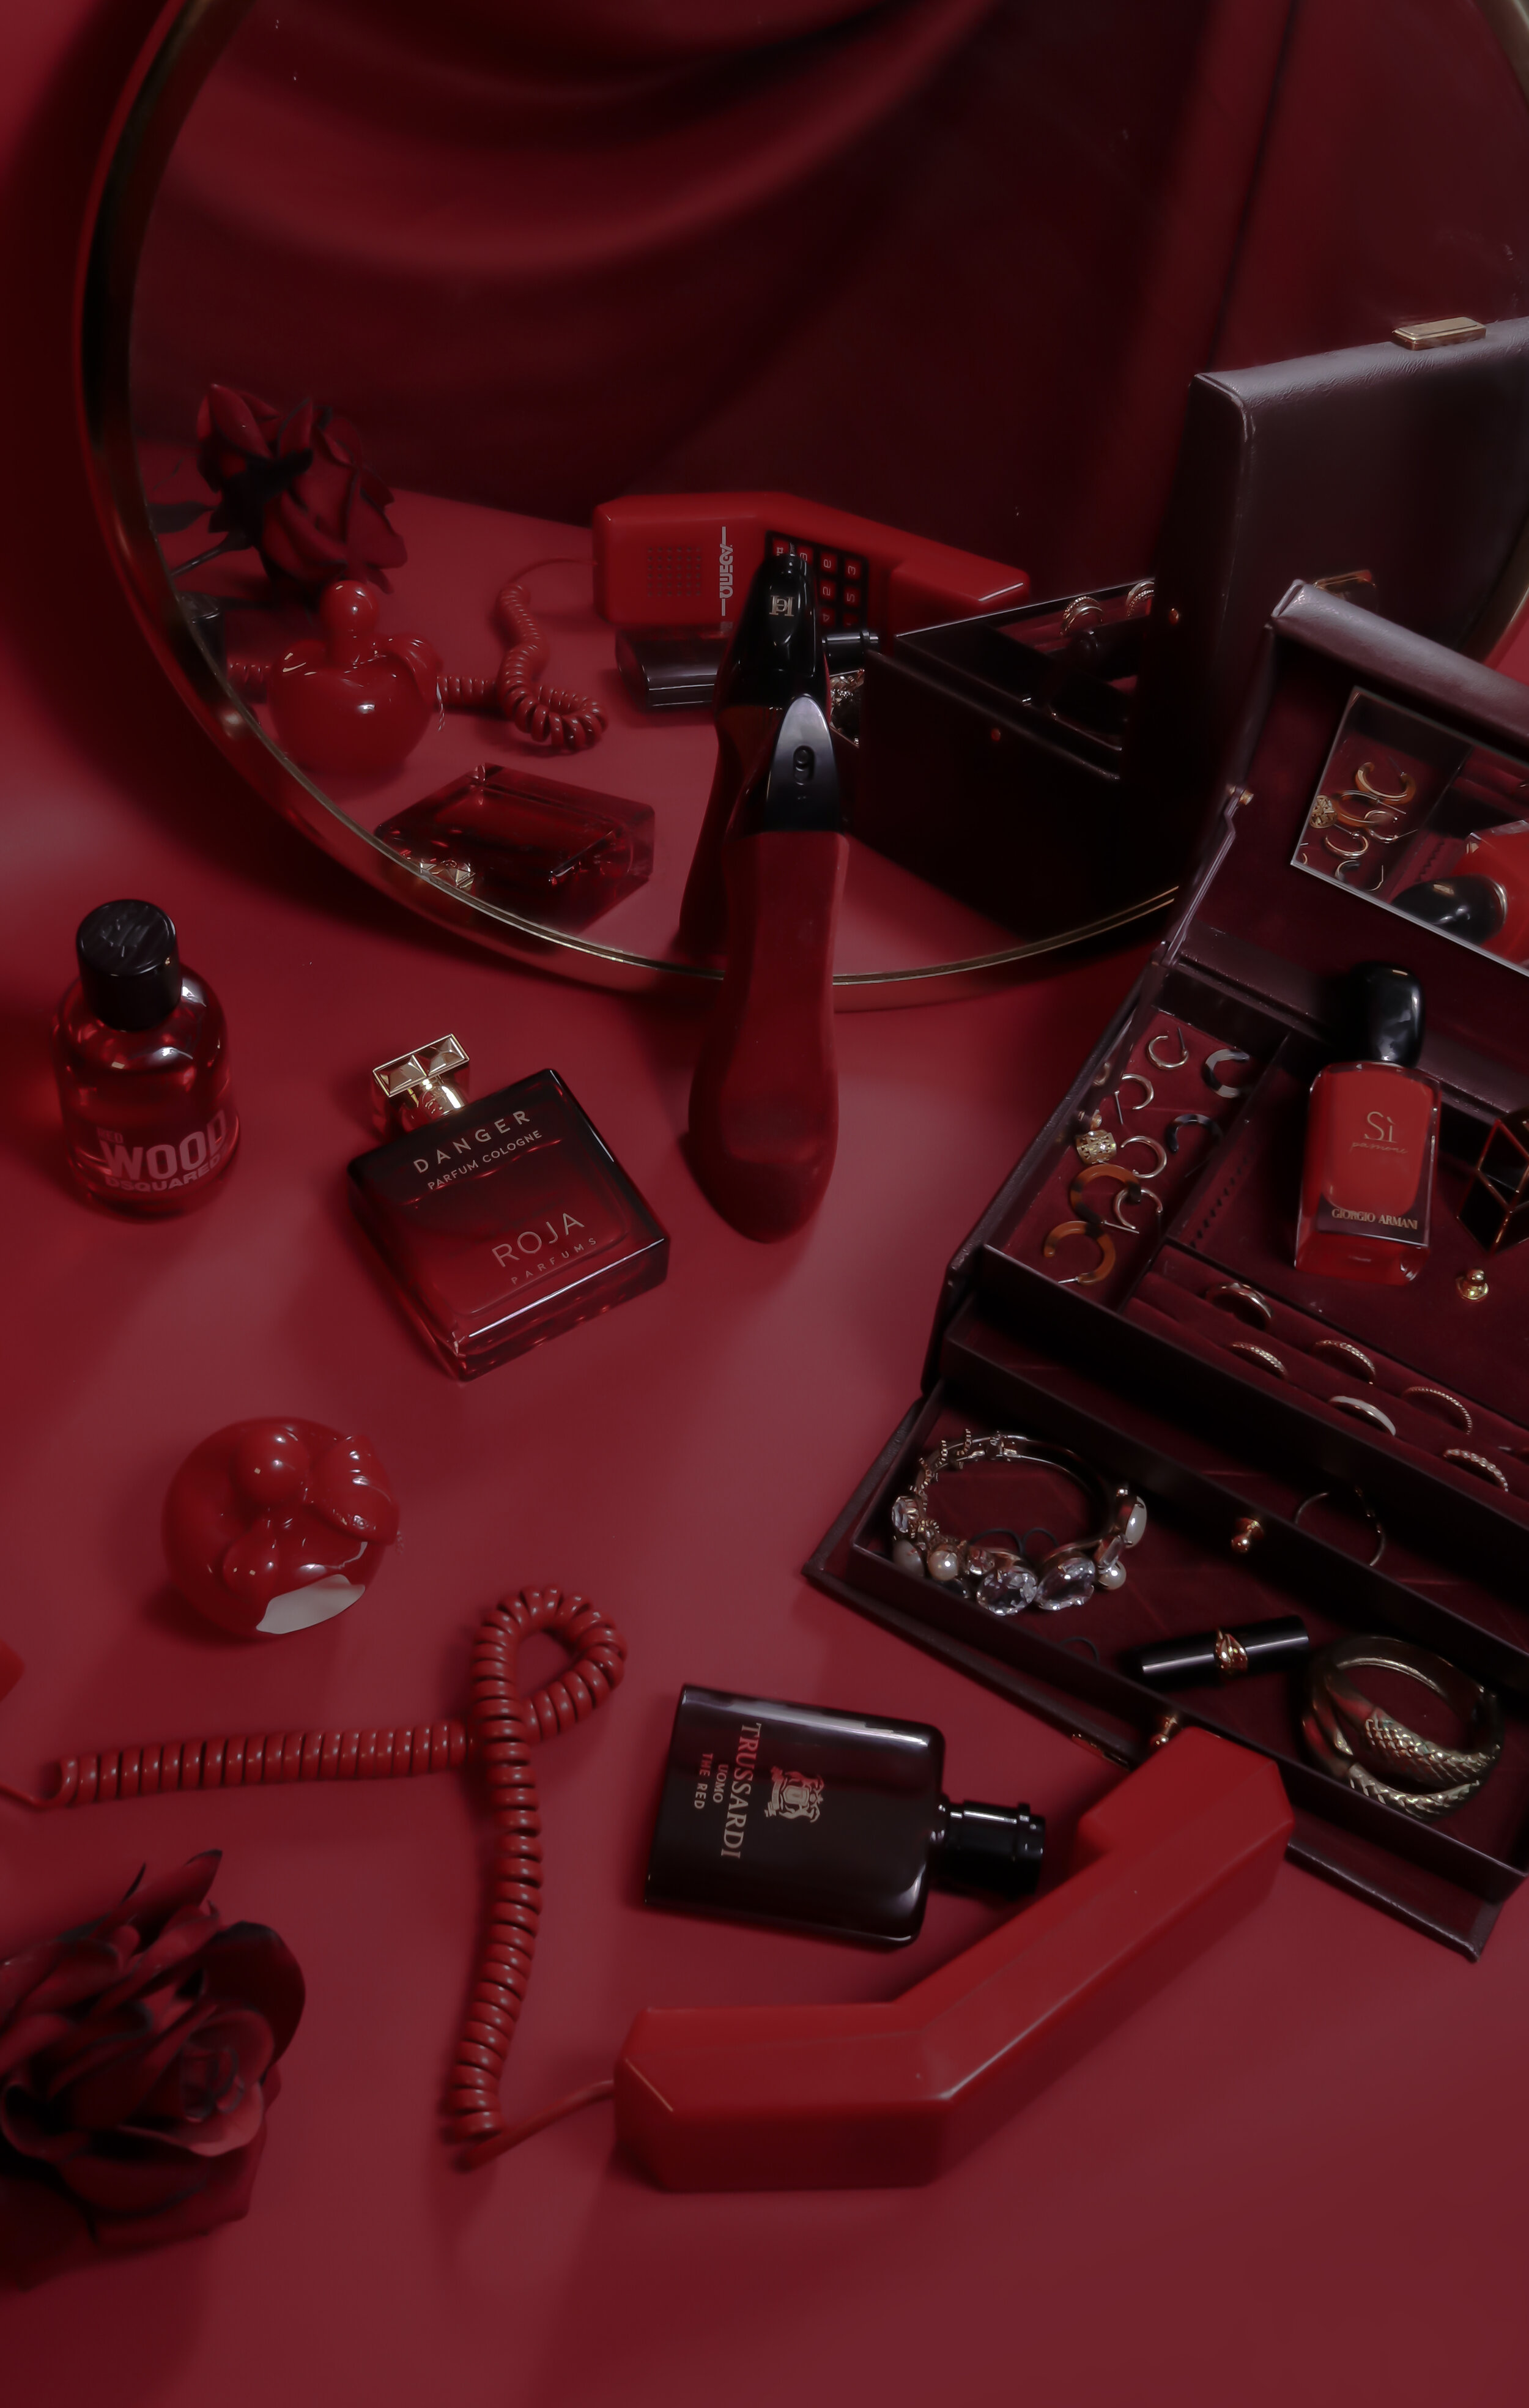 The red fragrance edit